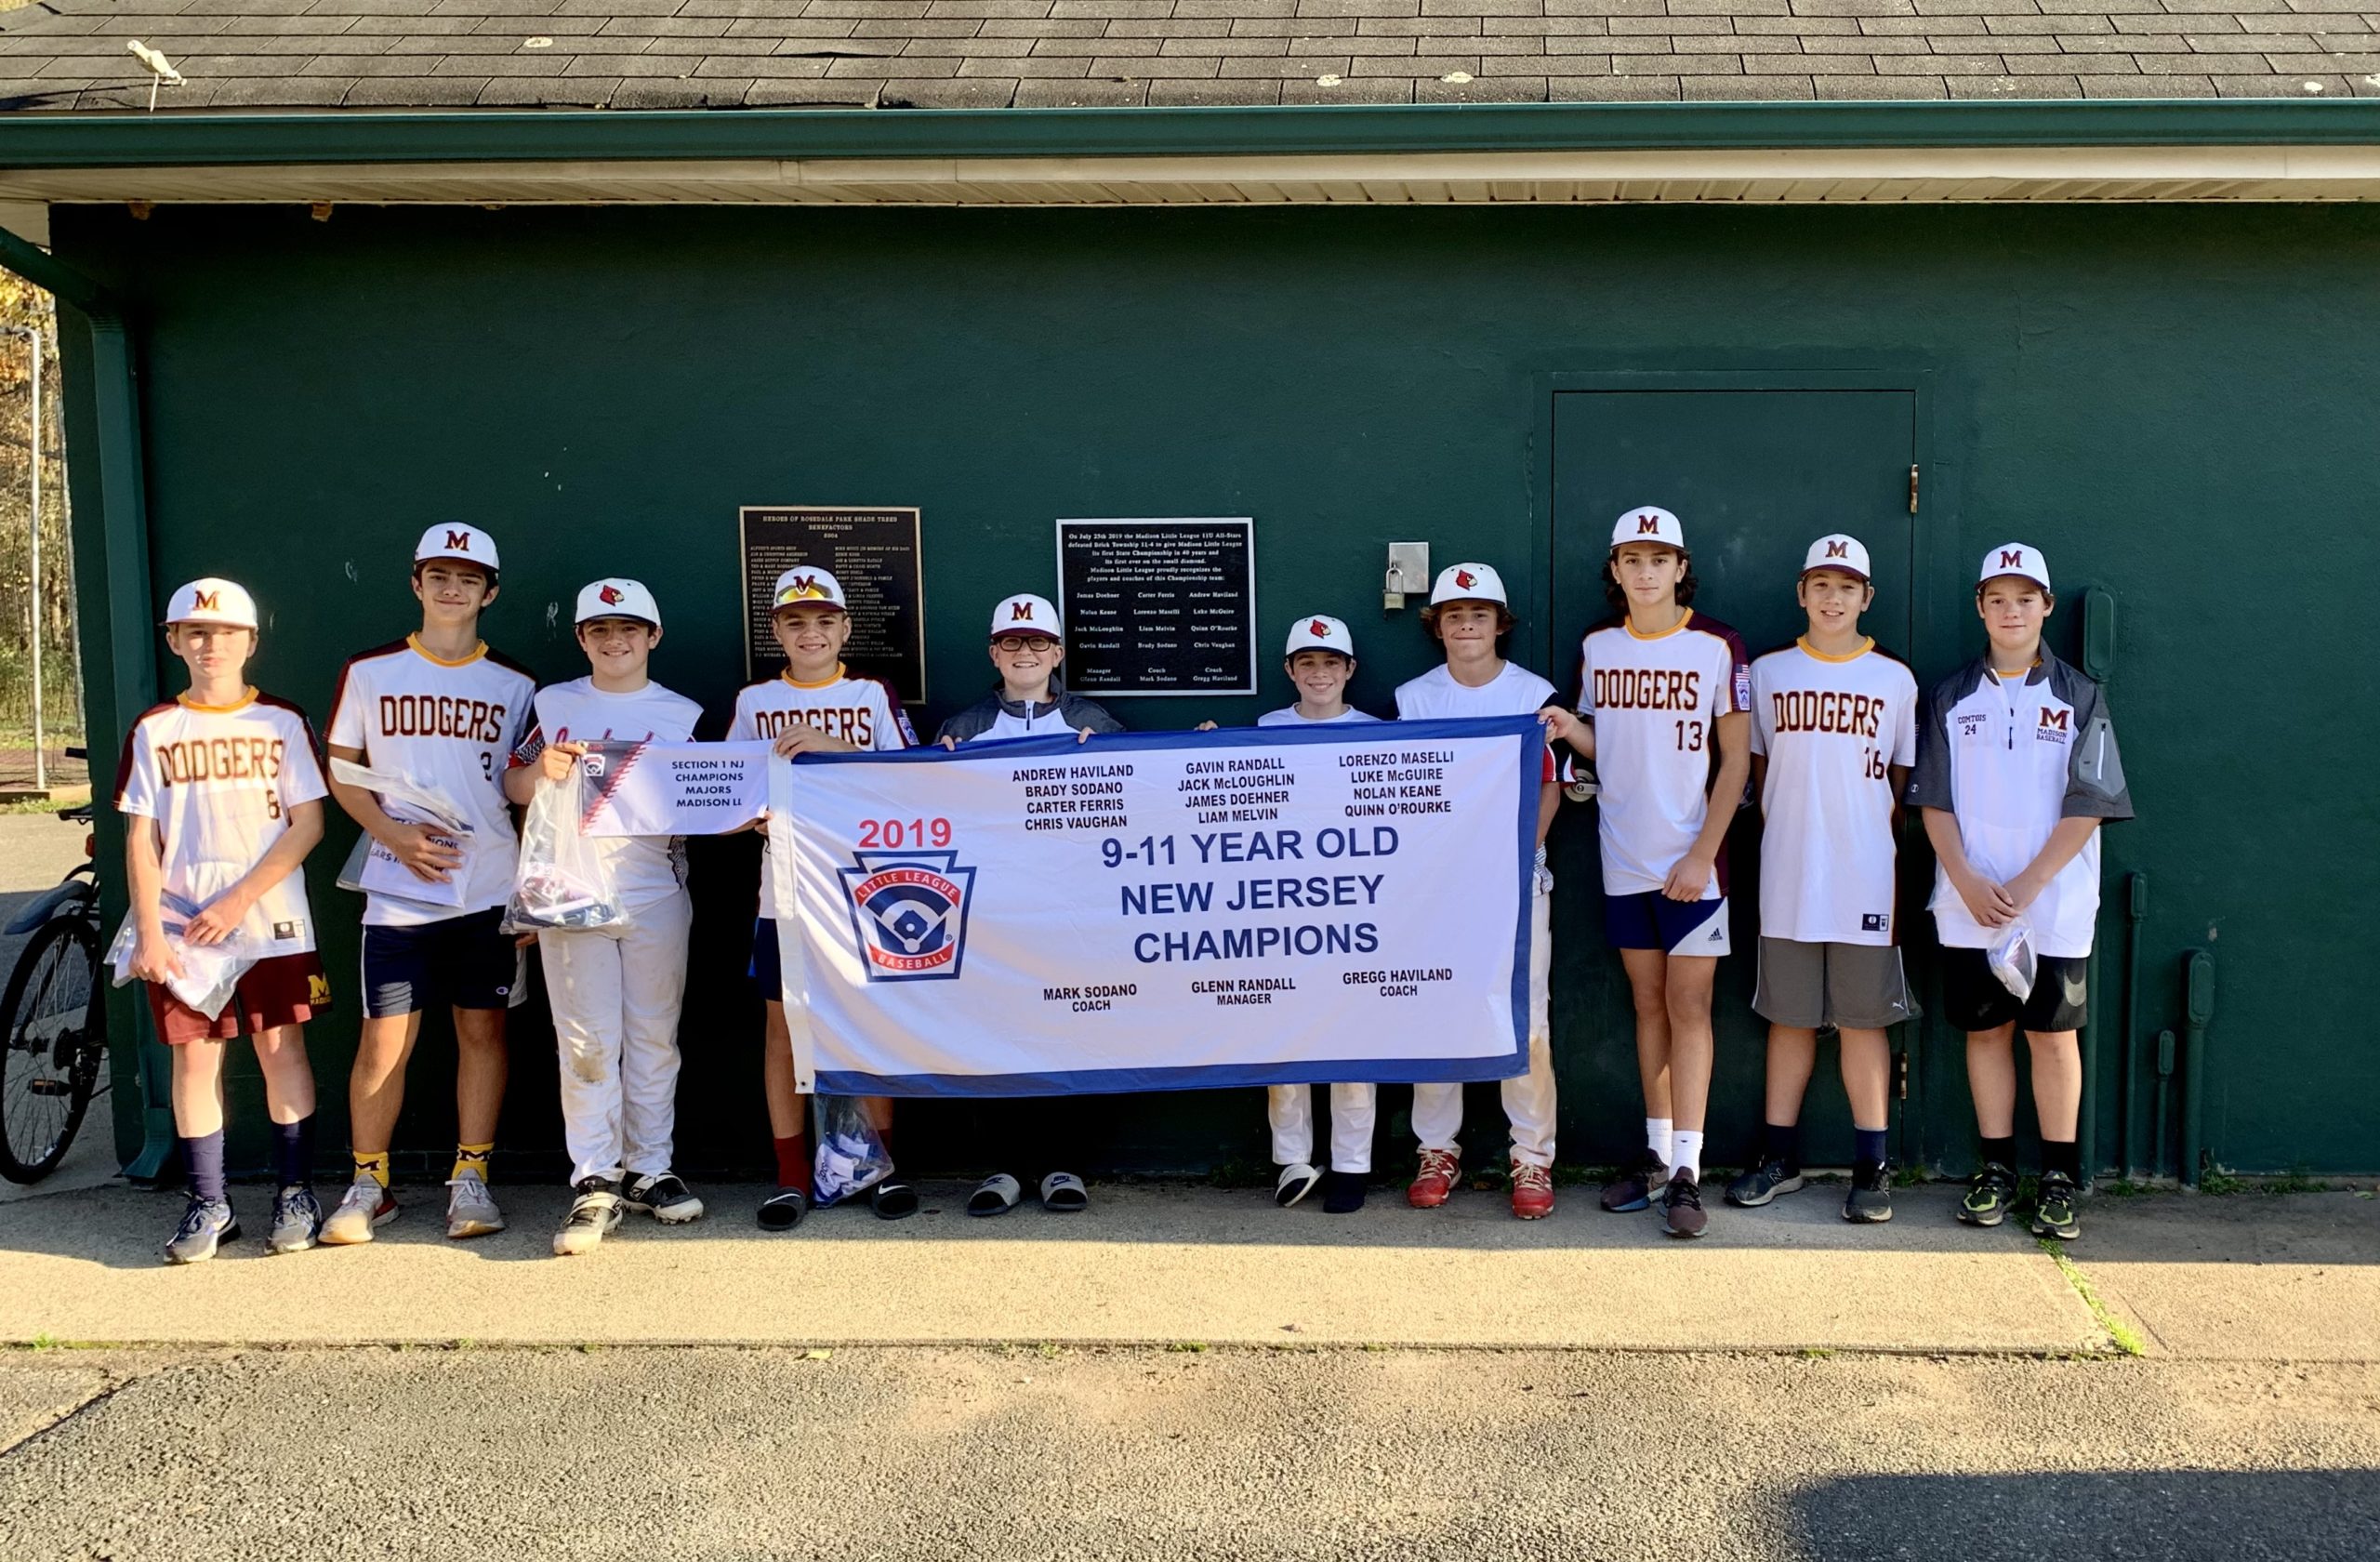 The All-Star team is honored with a plaque and banner commemorating their 2019 state title.